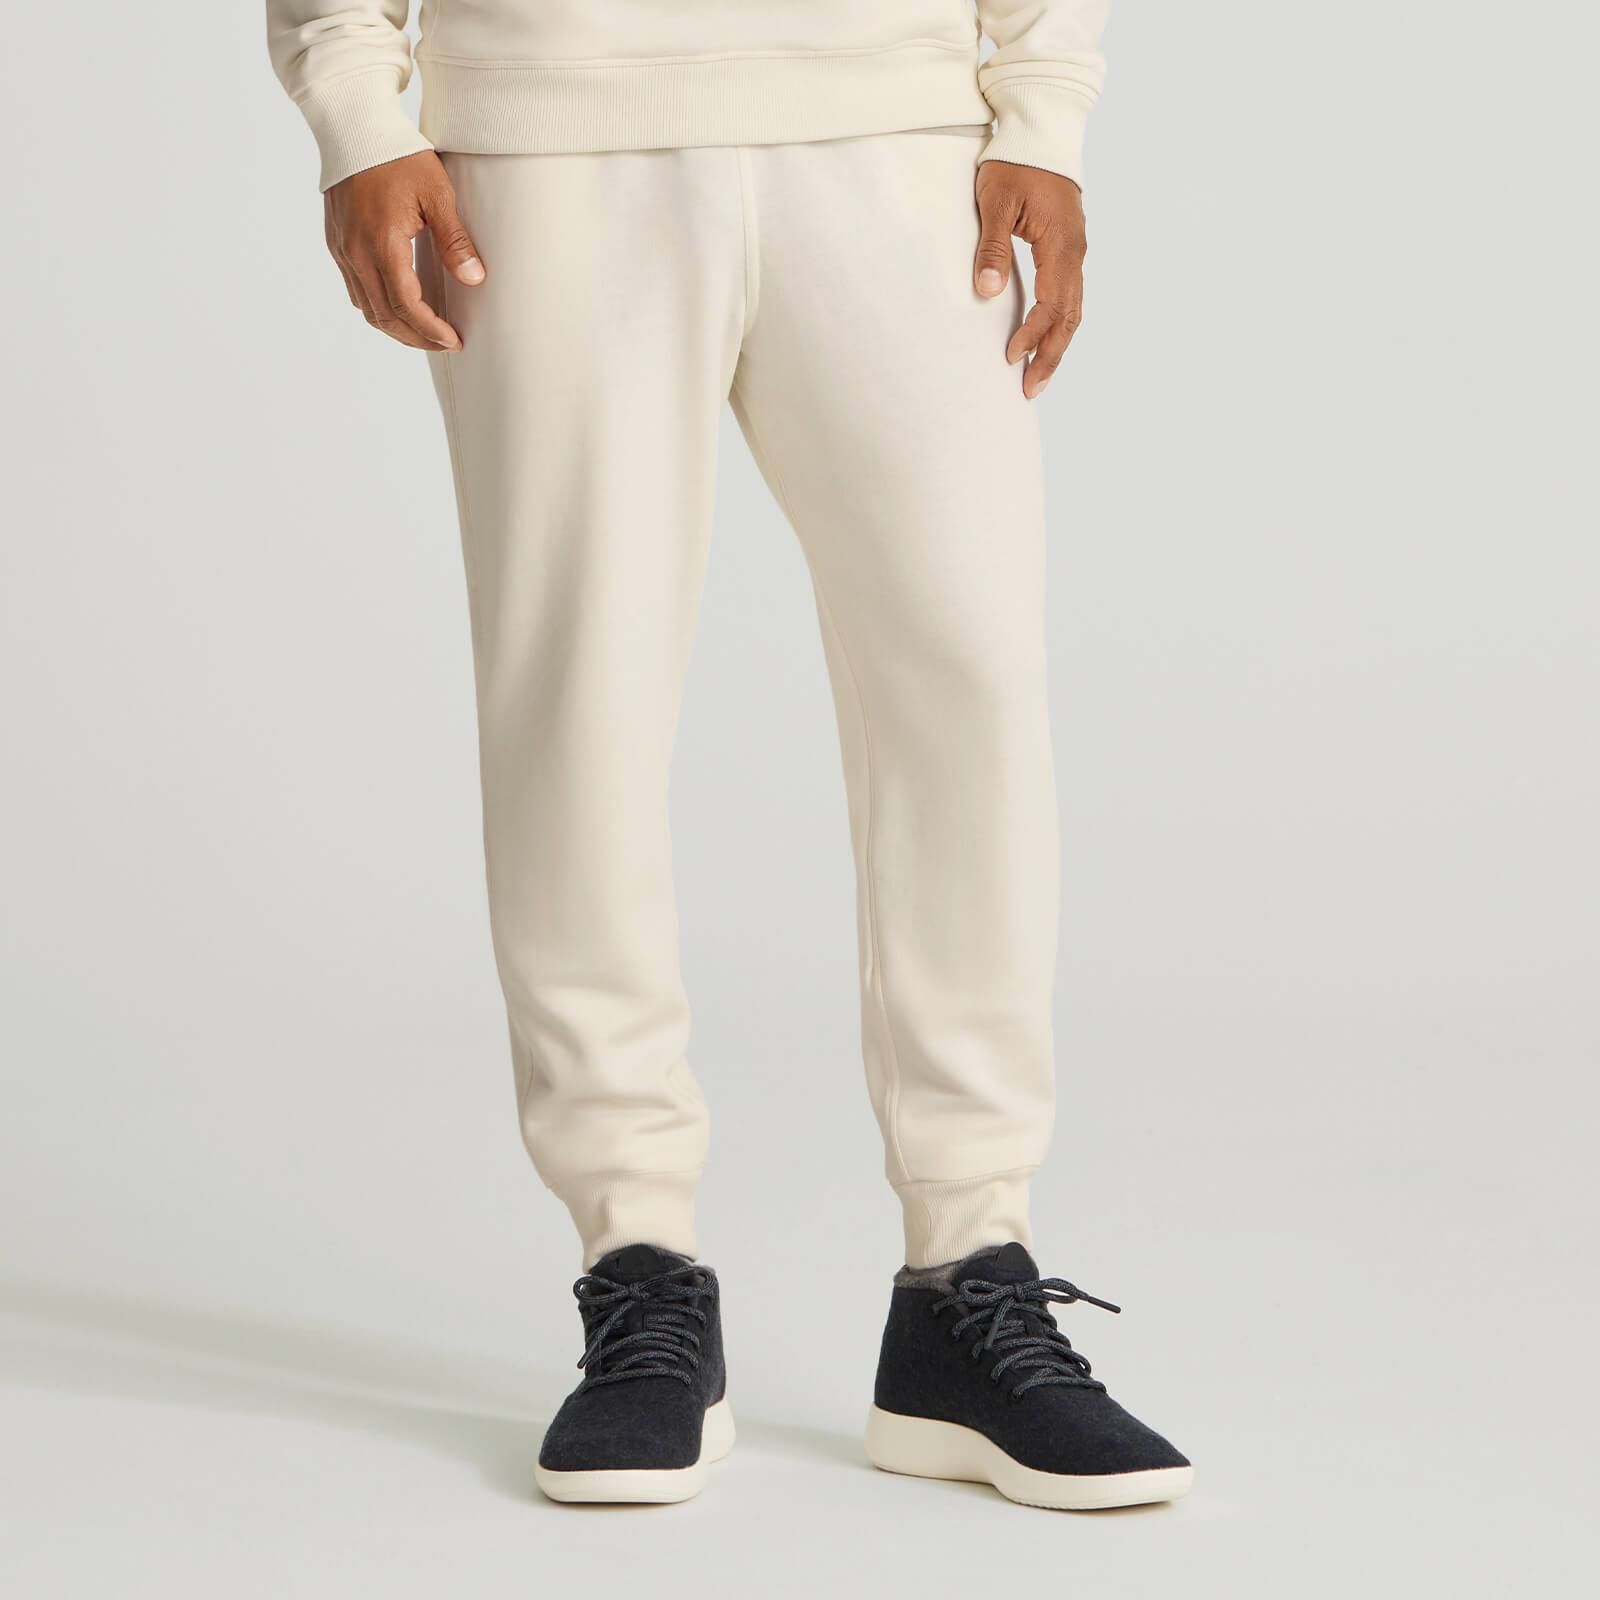 41 Best Sweatpants for Men to Wear in 2023, According to Style Experts